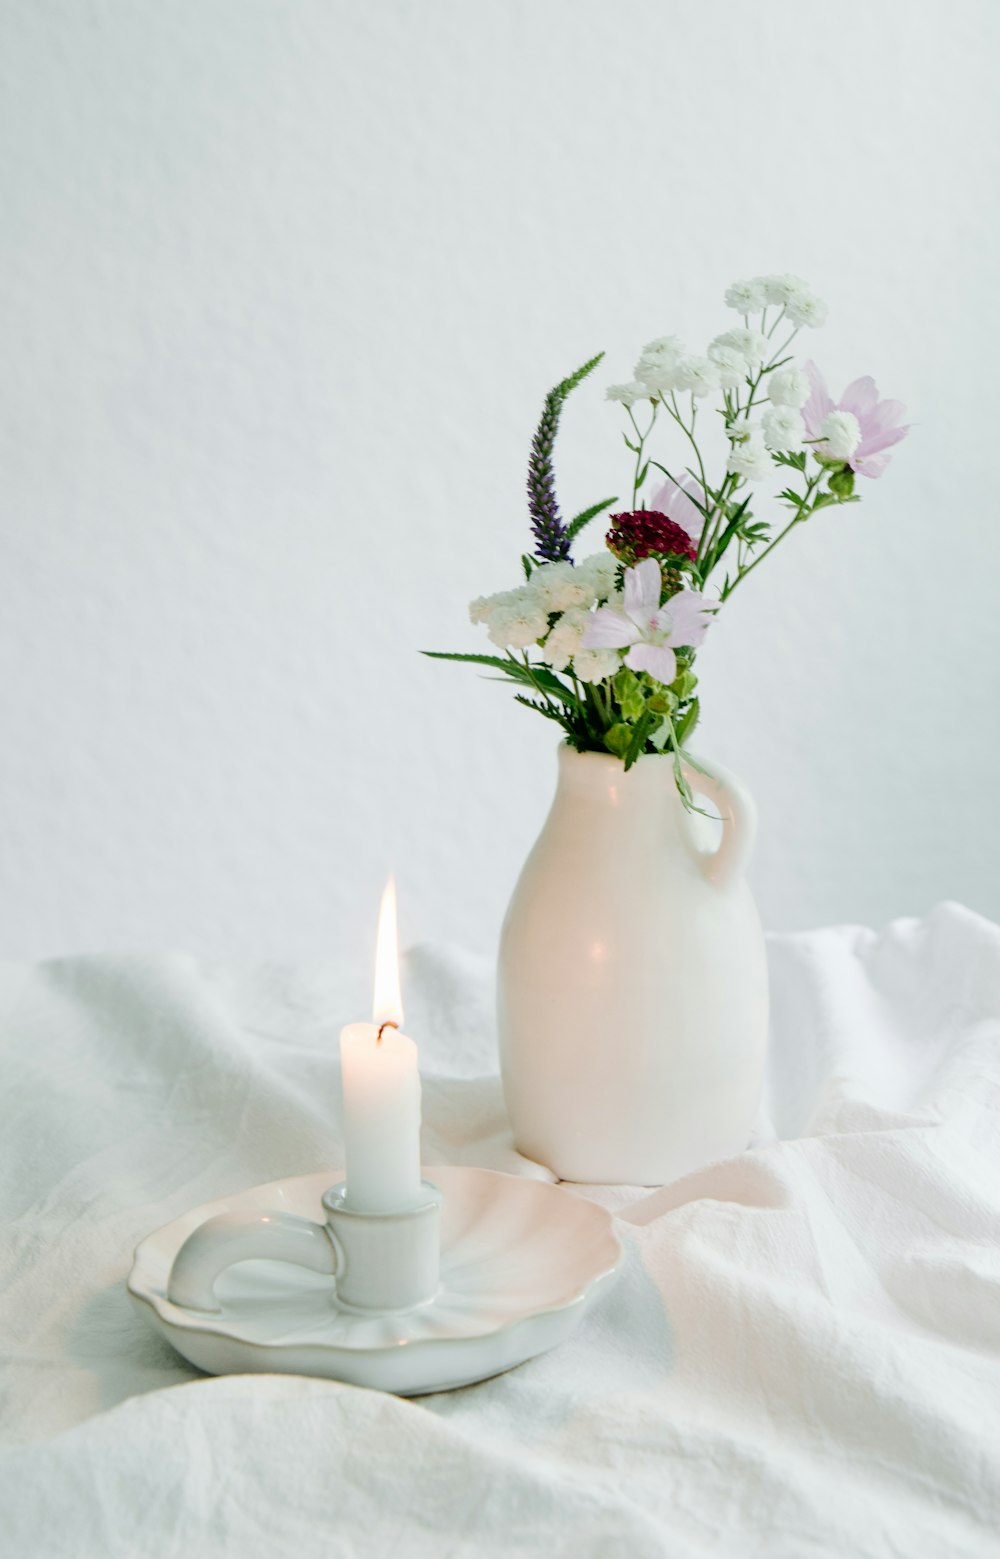 a white vase filled with flowers next to a lit candle